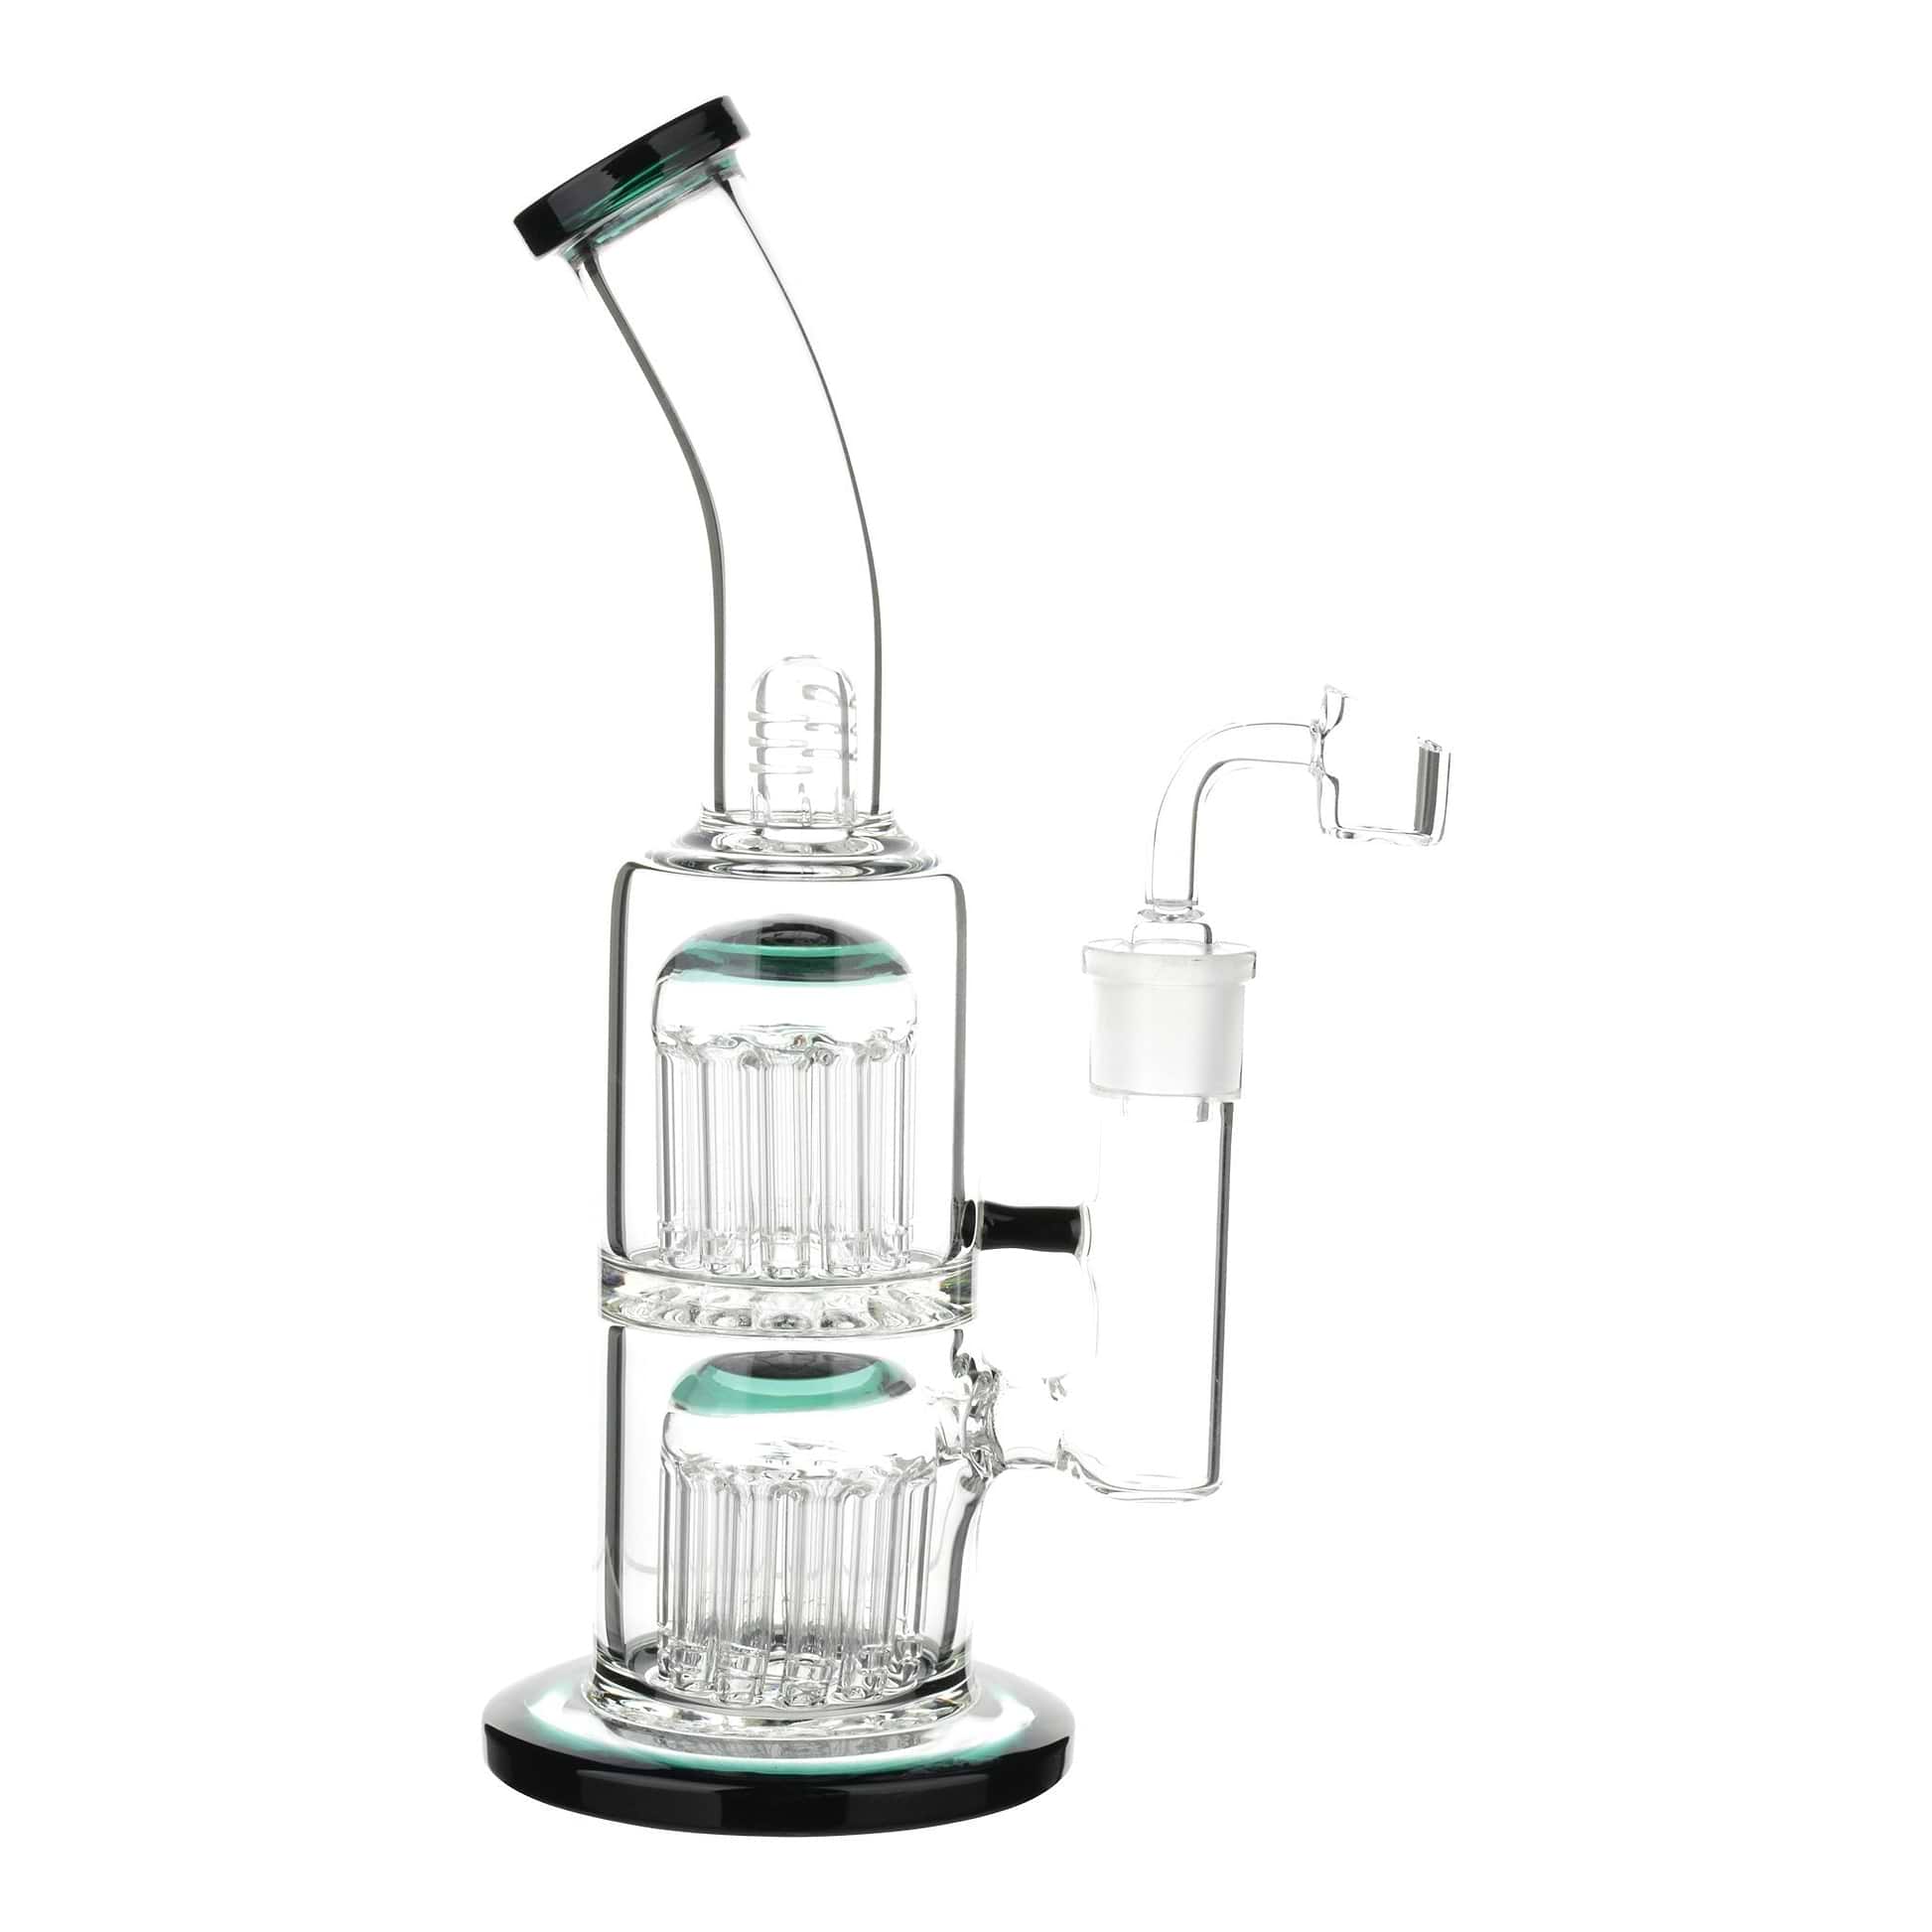 Full frontal shot of 11-inch glass bong mouthpiece facing left double barrel design perc green and black accents